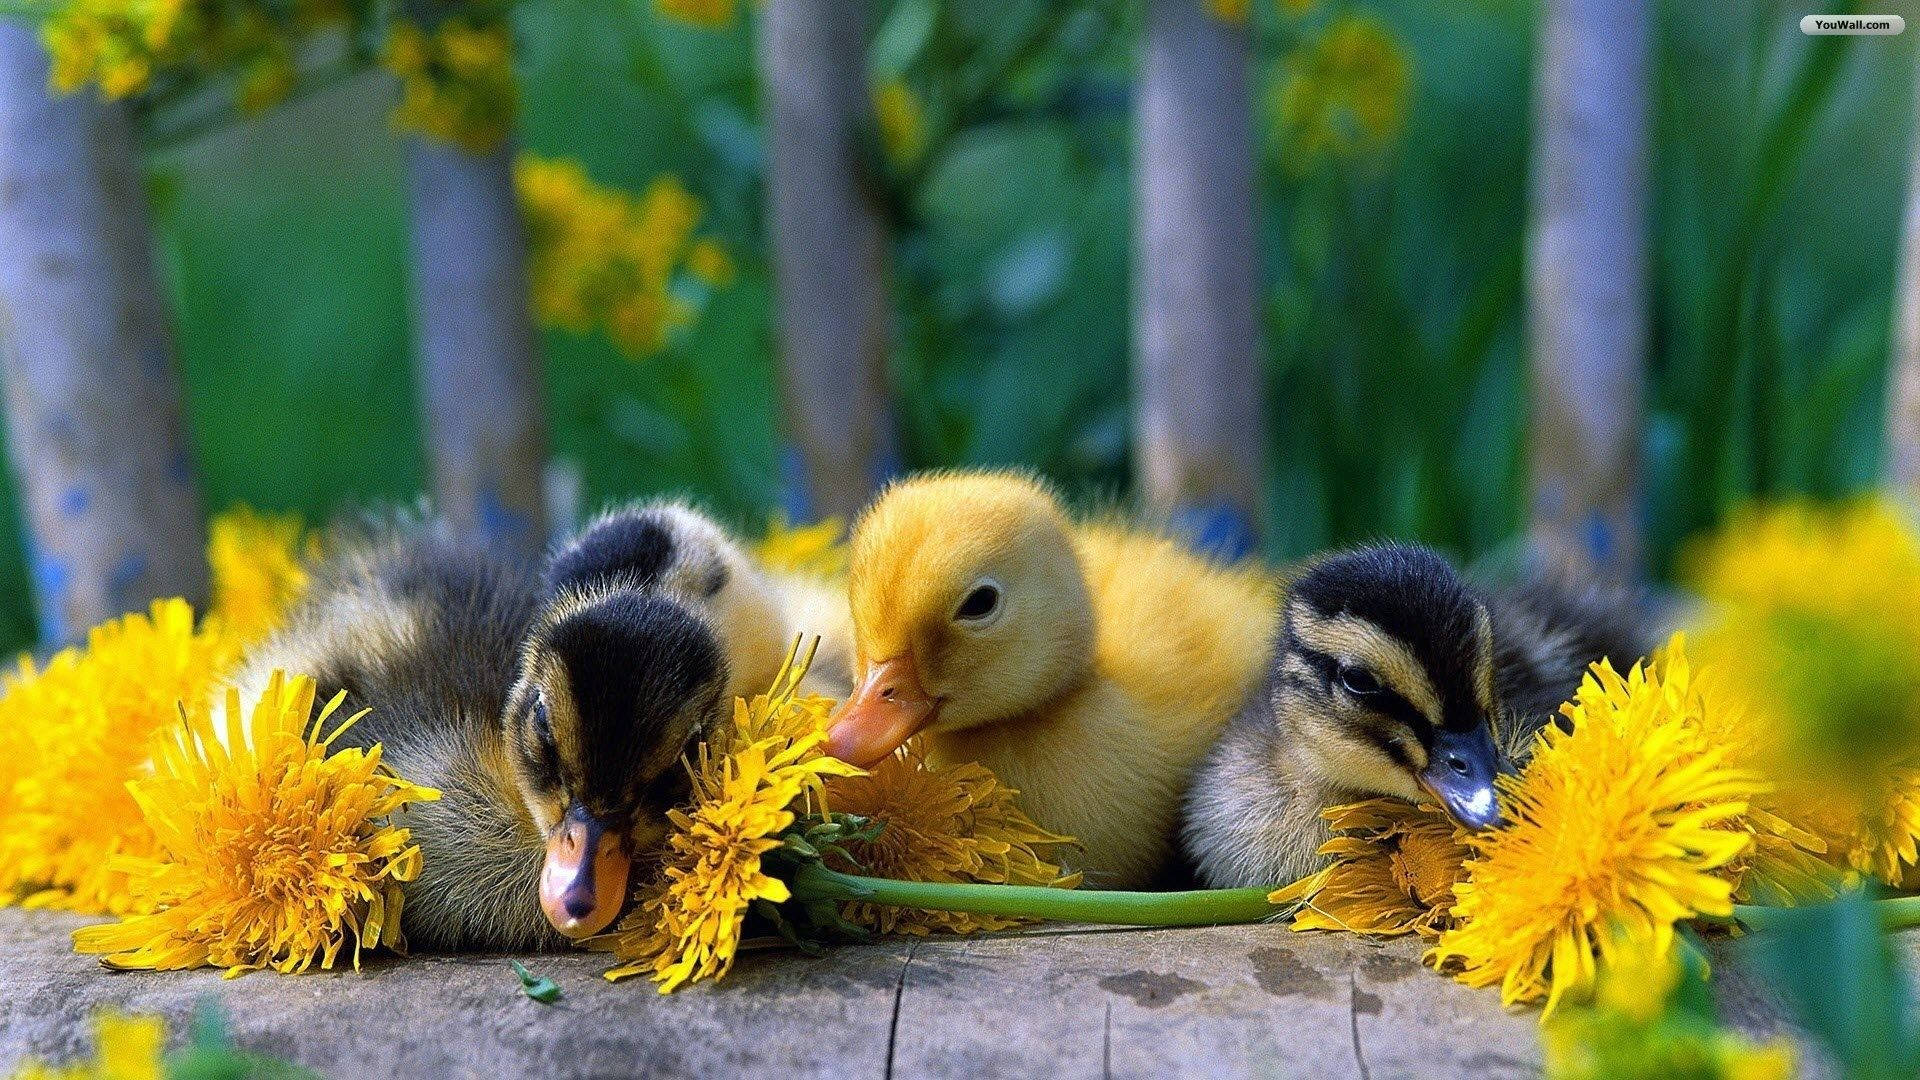 Baby Ducks With Flowers Background